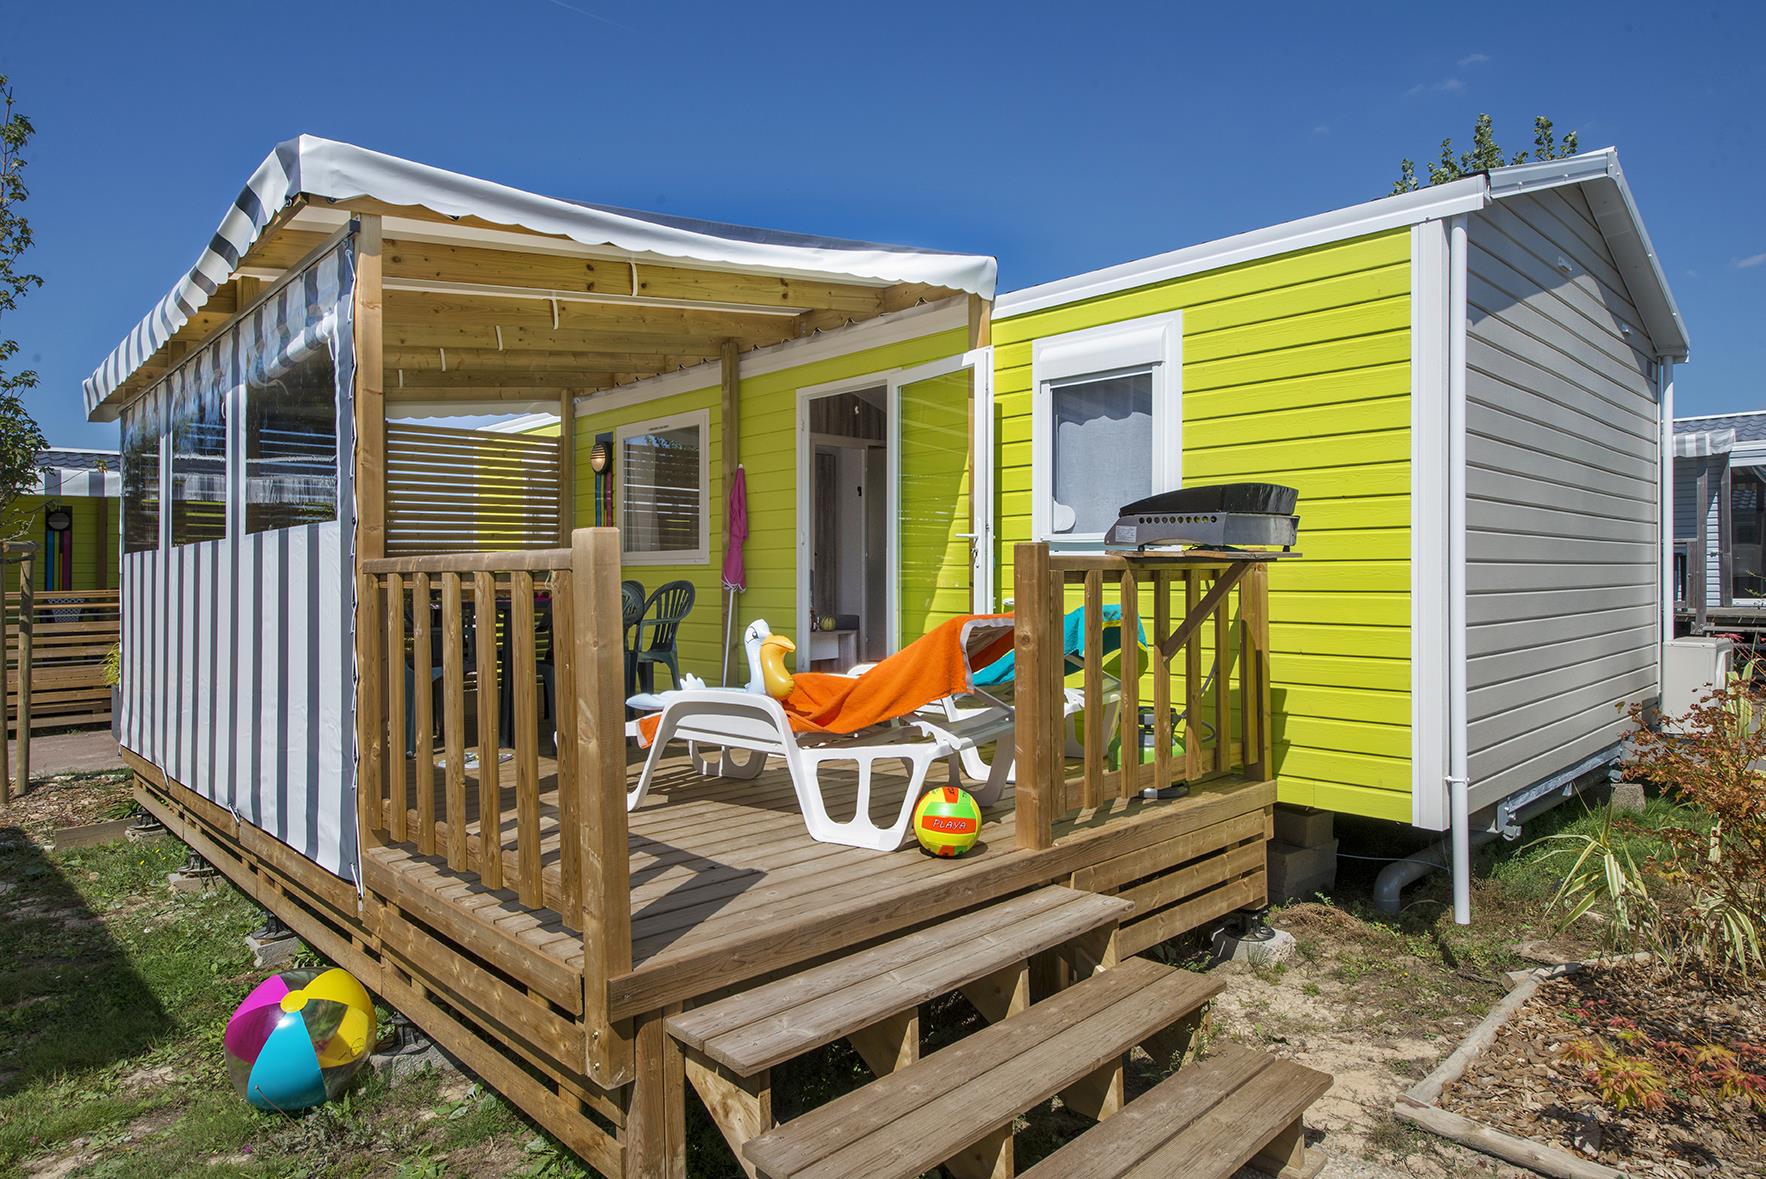 Accommodation - Gamme Duo 2 Bedrooms / 2 Bathrooms 32M2 - Camping l'Océan